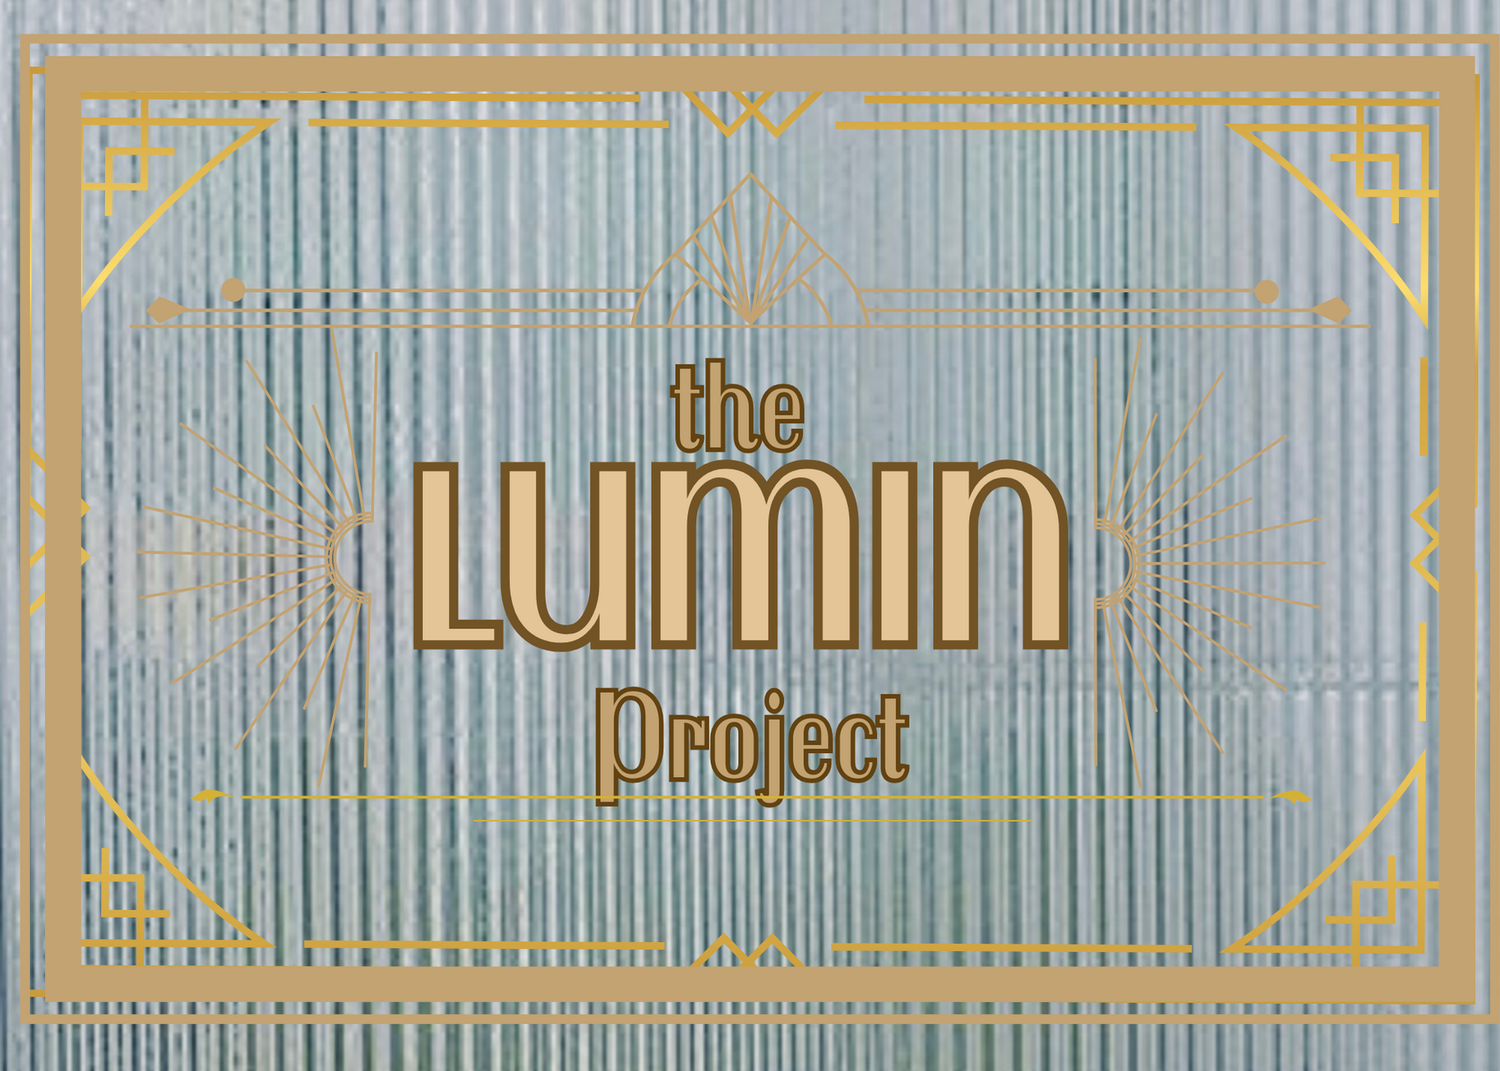 The Lumin Project